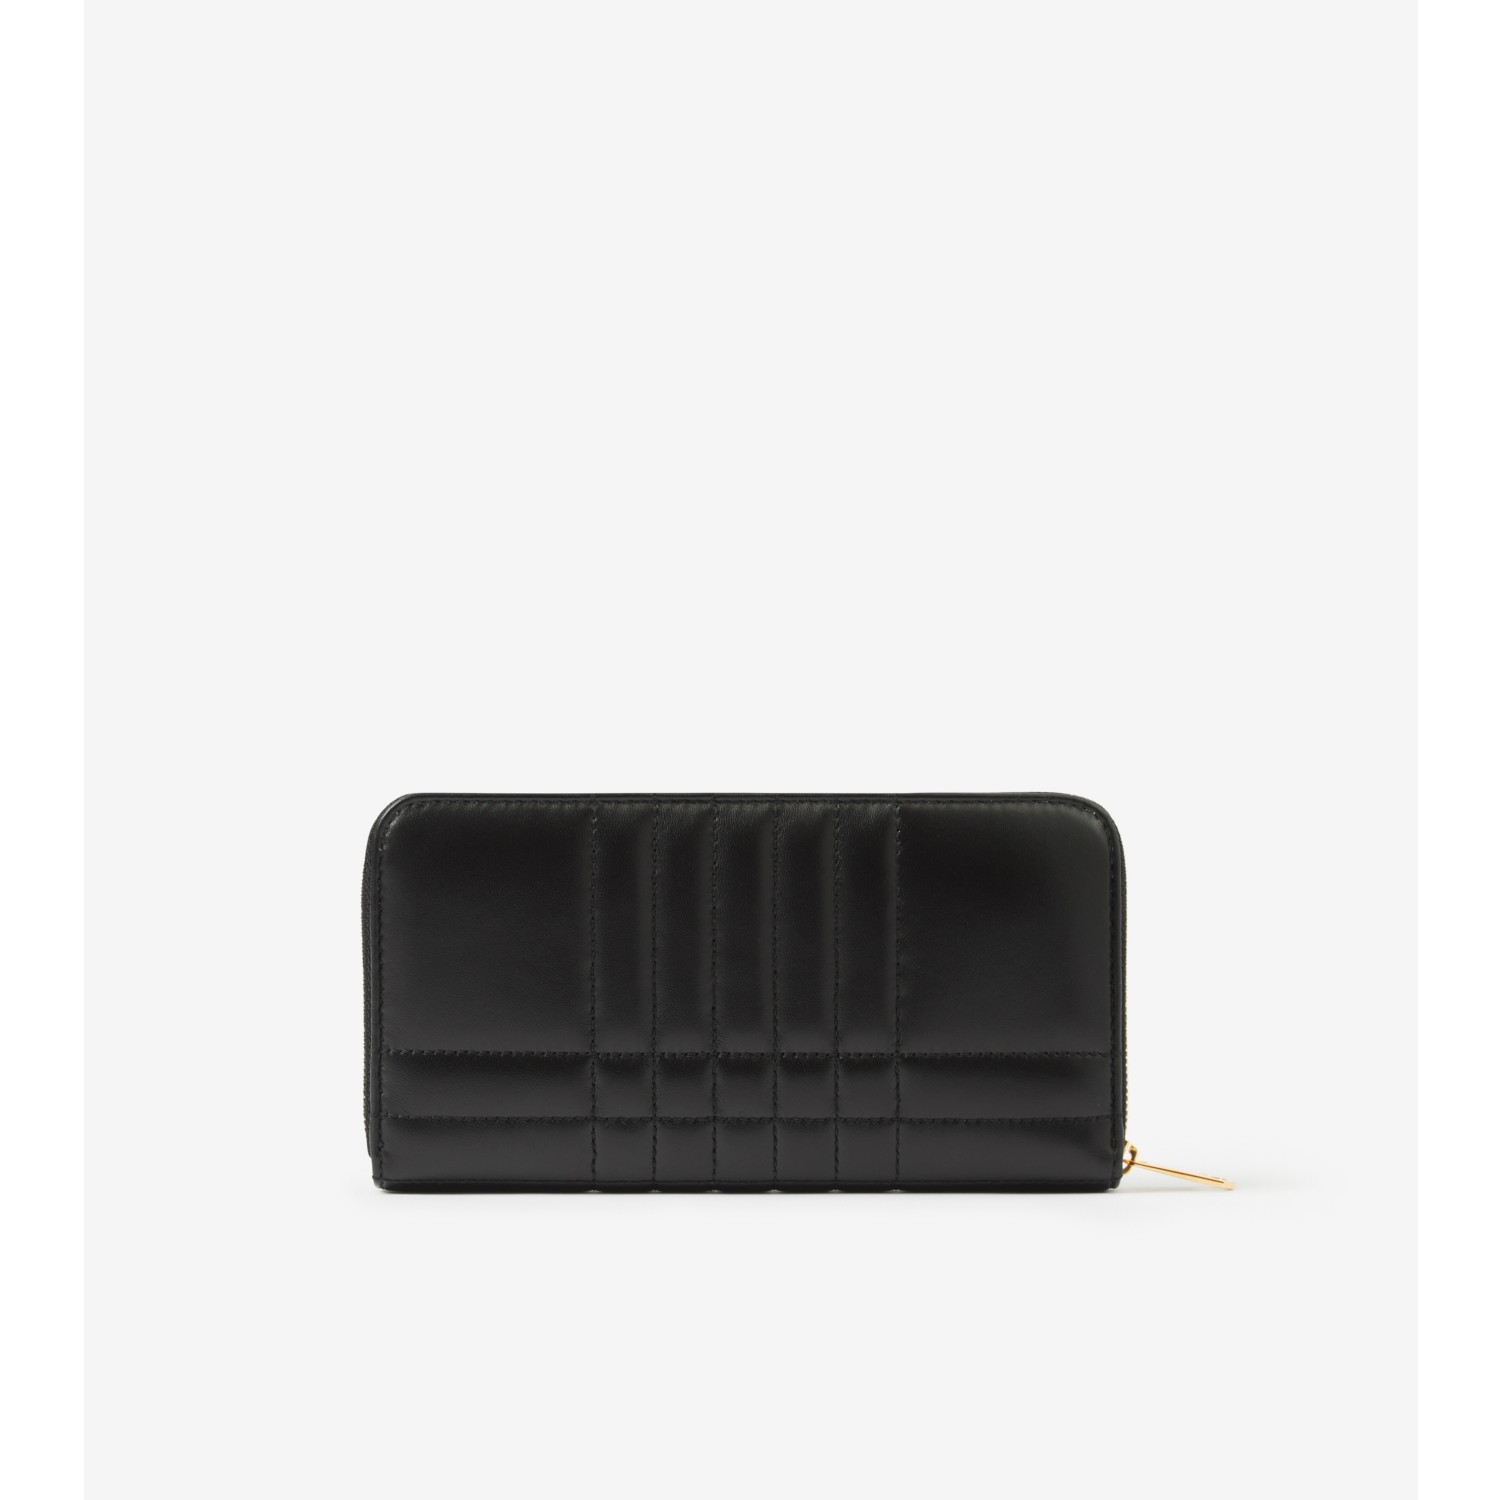 Burberry black Leather Quilted Lola Zip-Around Wallet